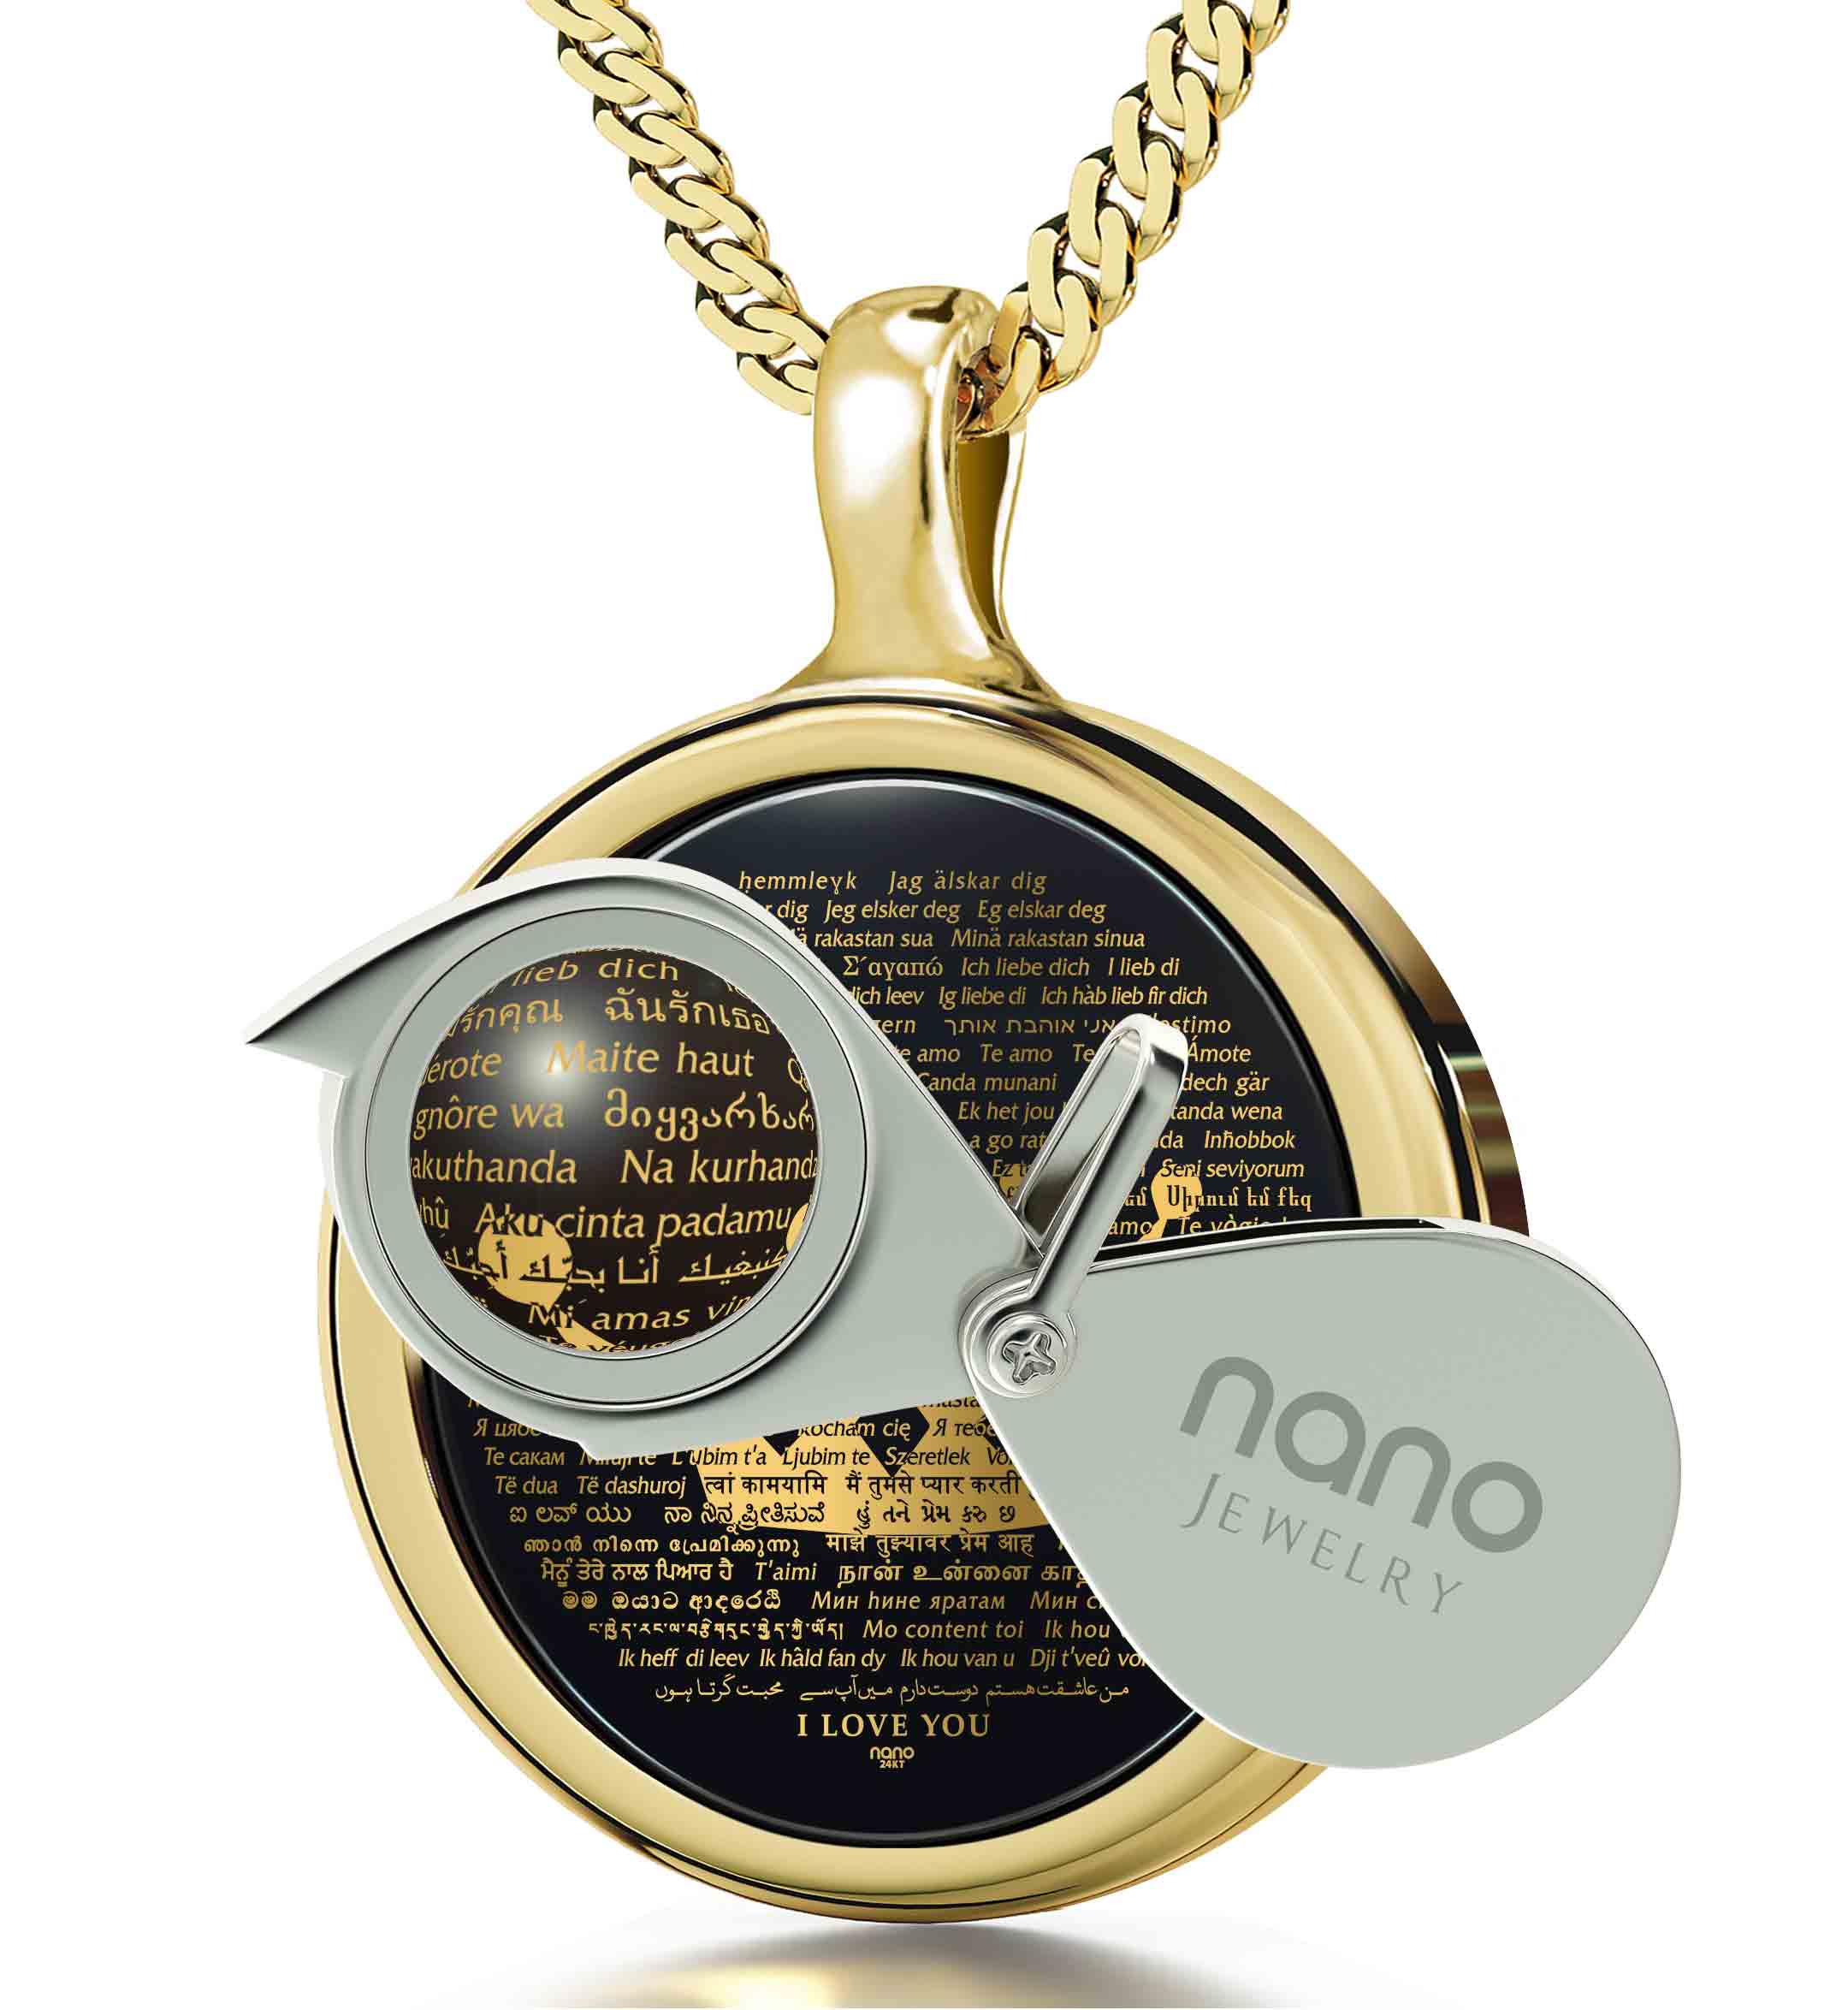 Round Onyx Pendant 'king' - 'I Love You' in 120 Languages